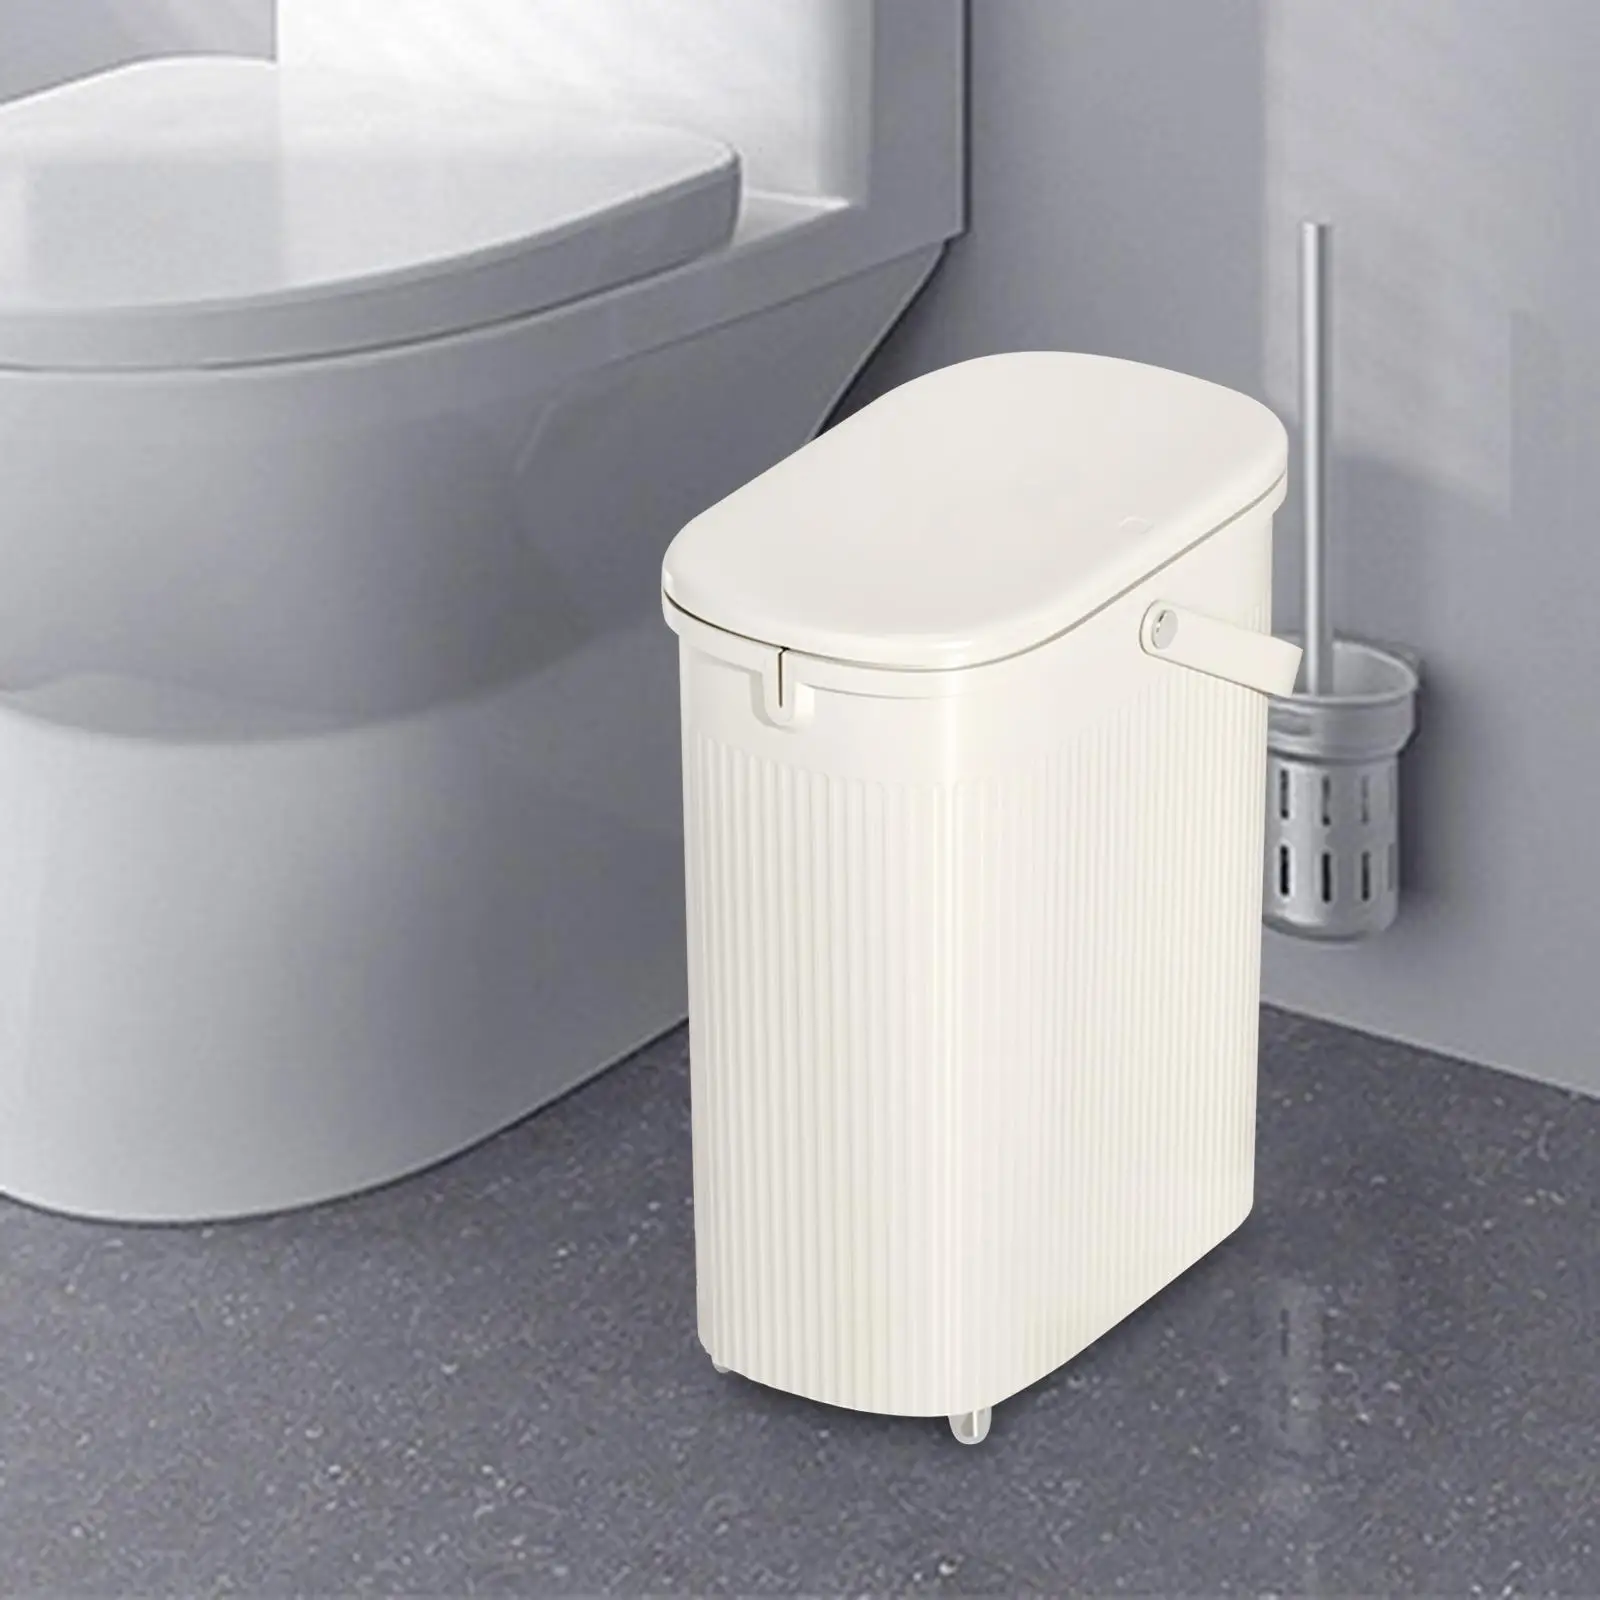 Rectangular Trash Can with Press Type Lid Simple Design Wastebasket Slim Garbage Can for Sunroom Bedroom Entryway Kitchen